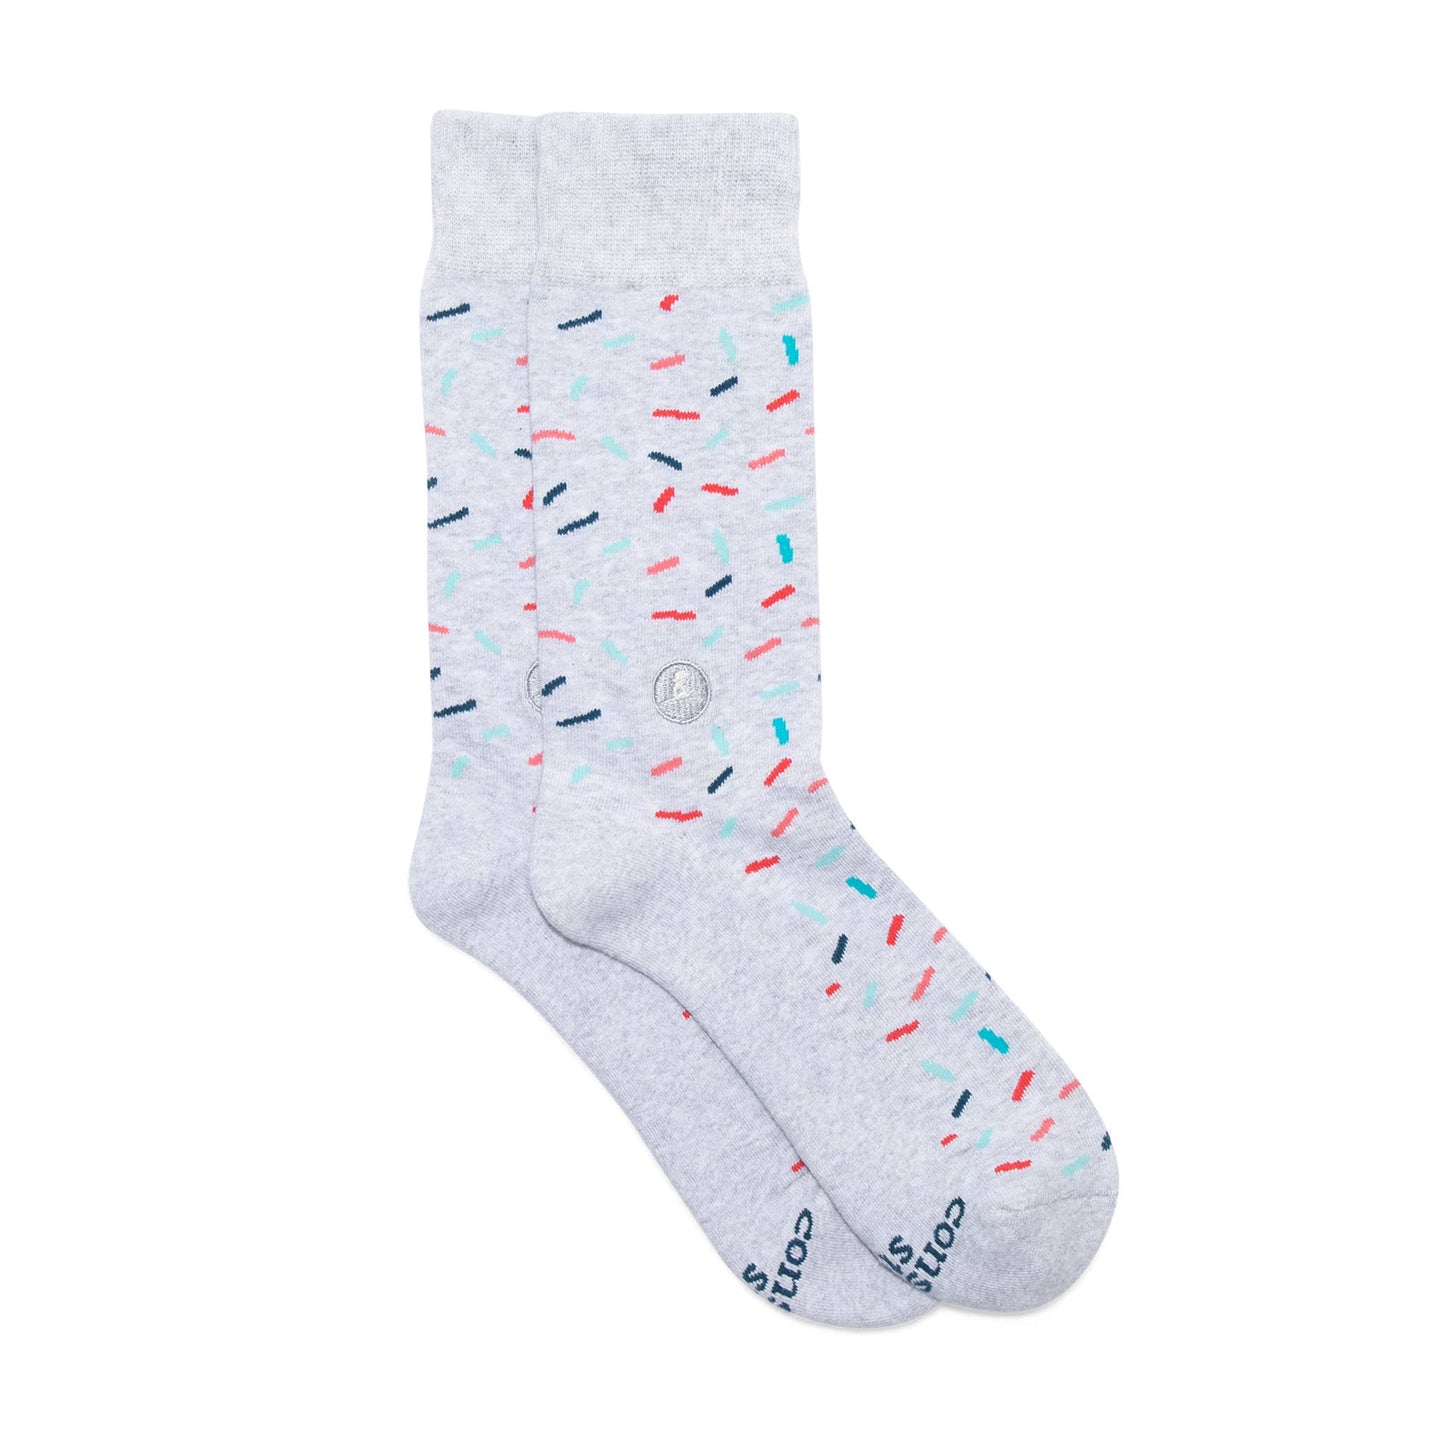 Conscious Step - Socks That Find a Cure (Gray Confetti)